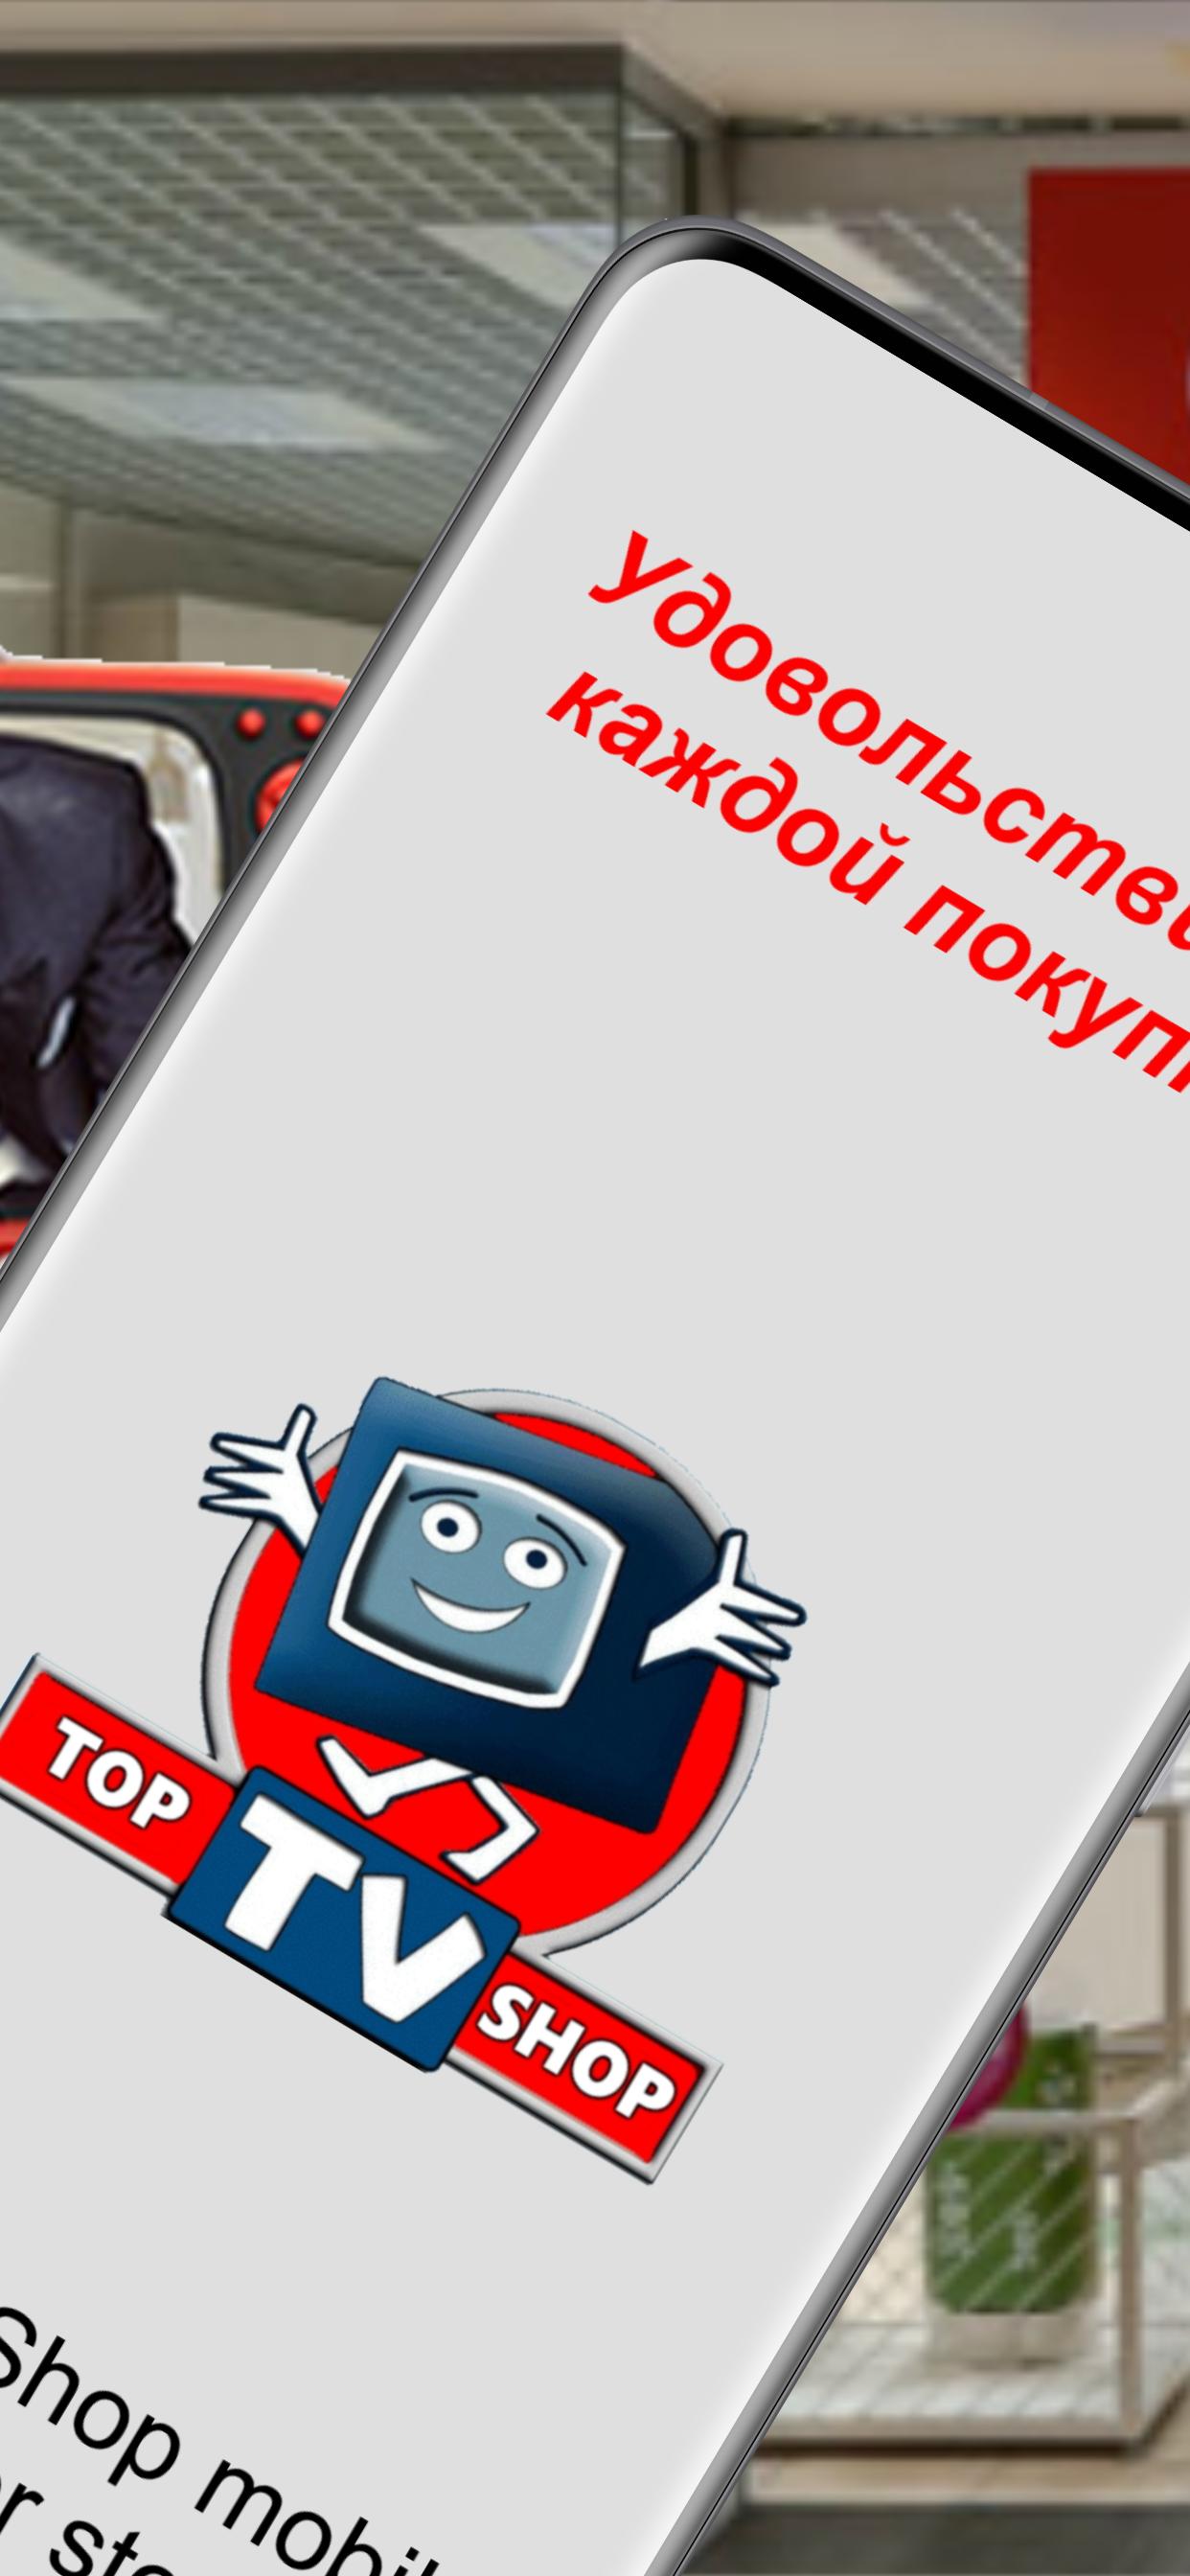 TV Top Shop mobile partner store for Android - APK Download